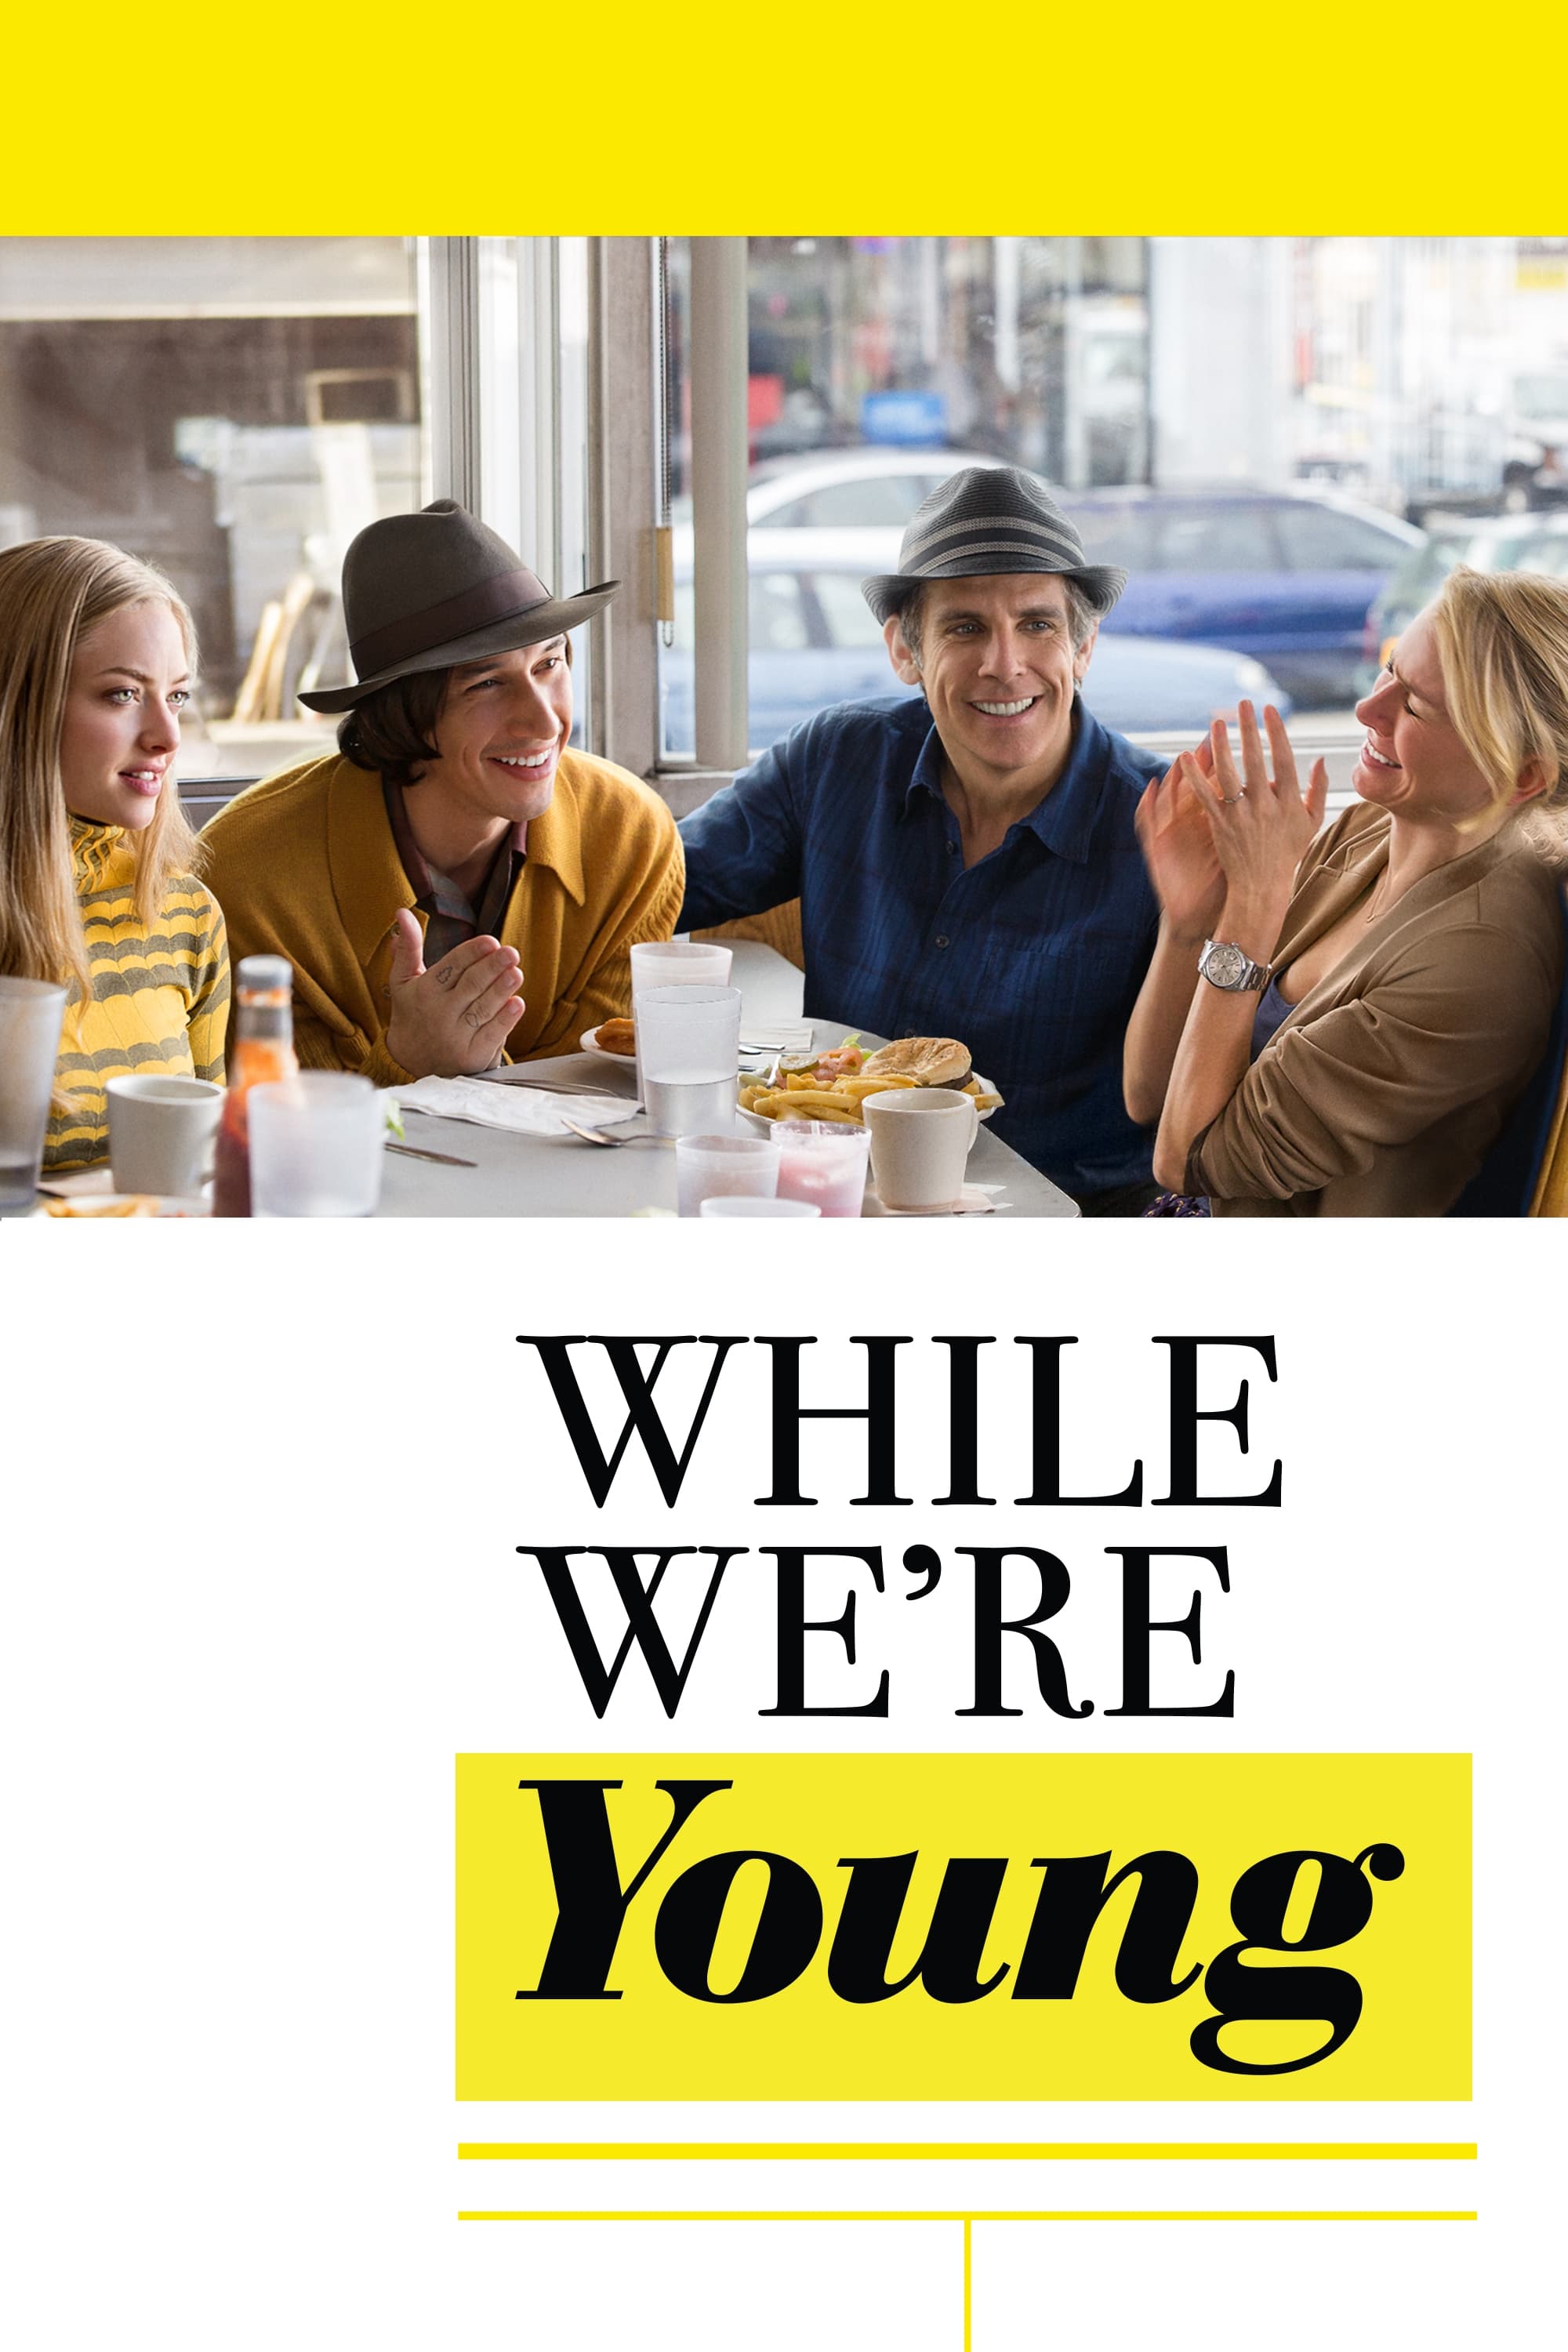 While Were Young